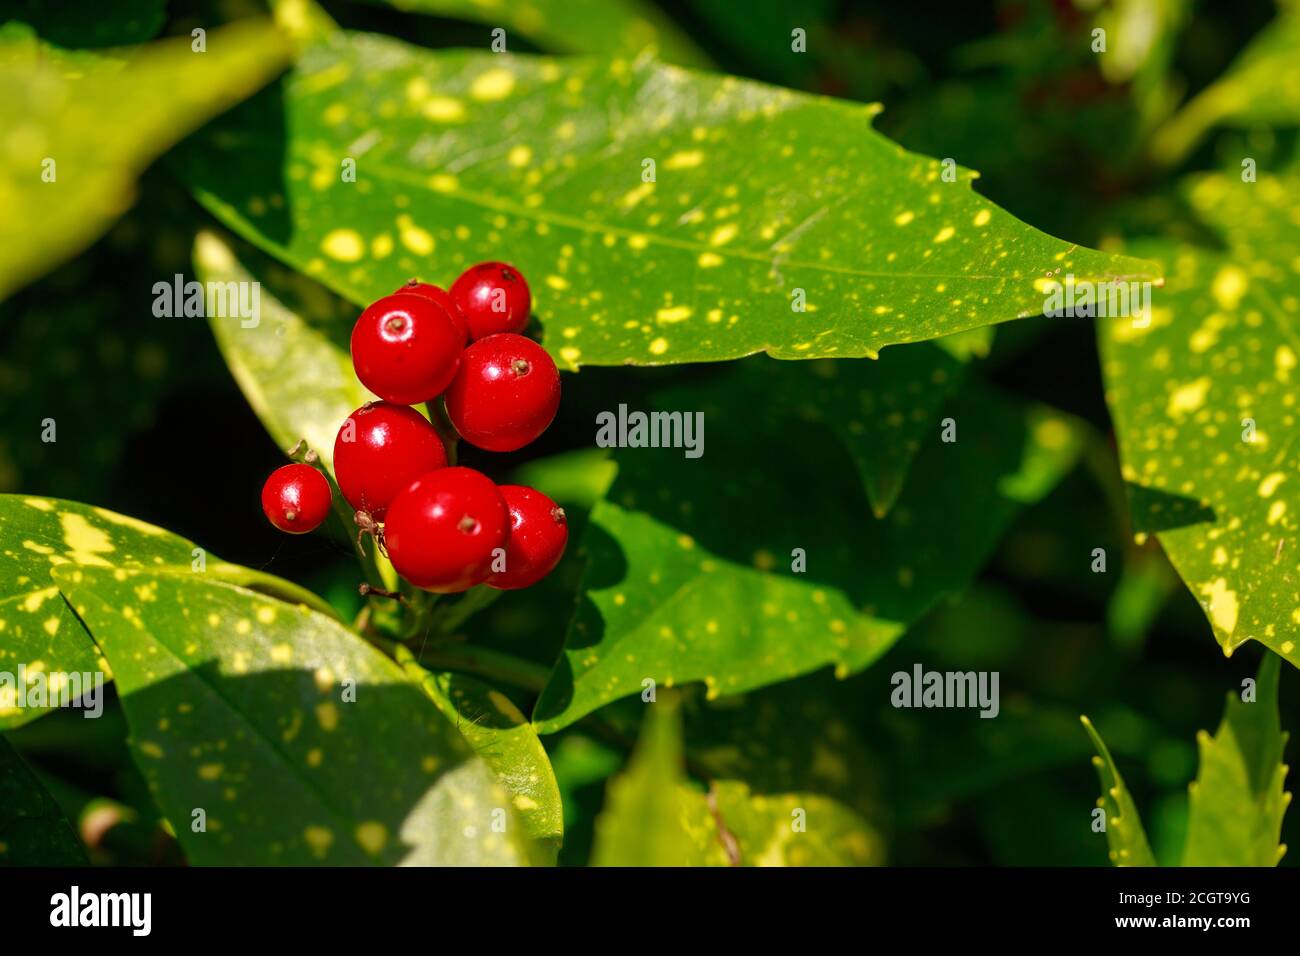 Bright Red berries against lush green flecked leaves Stock Photo